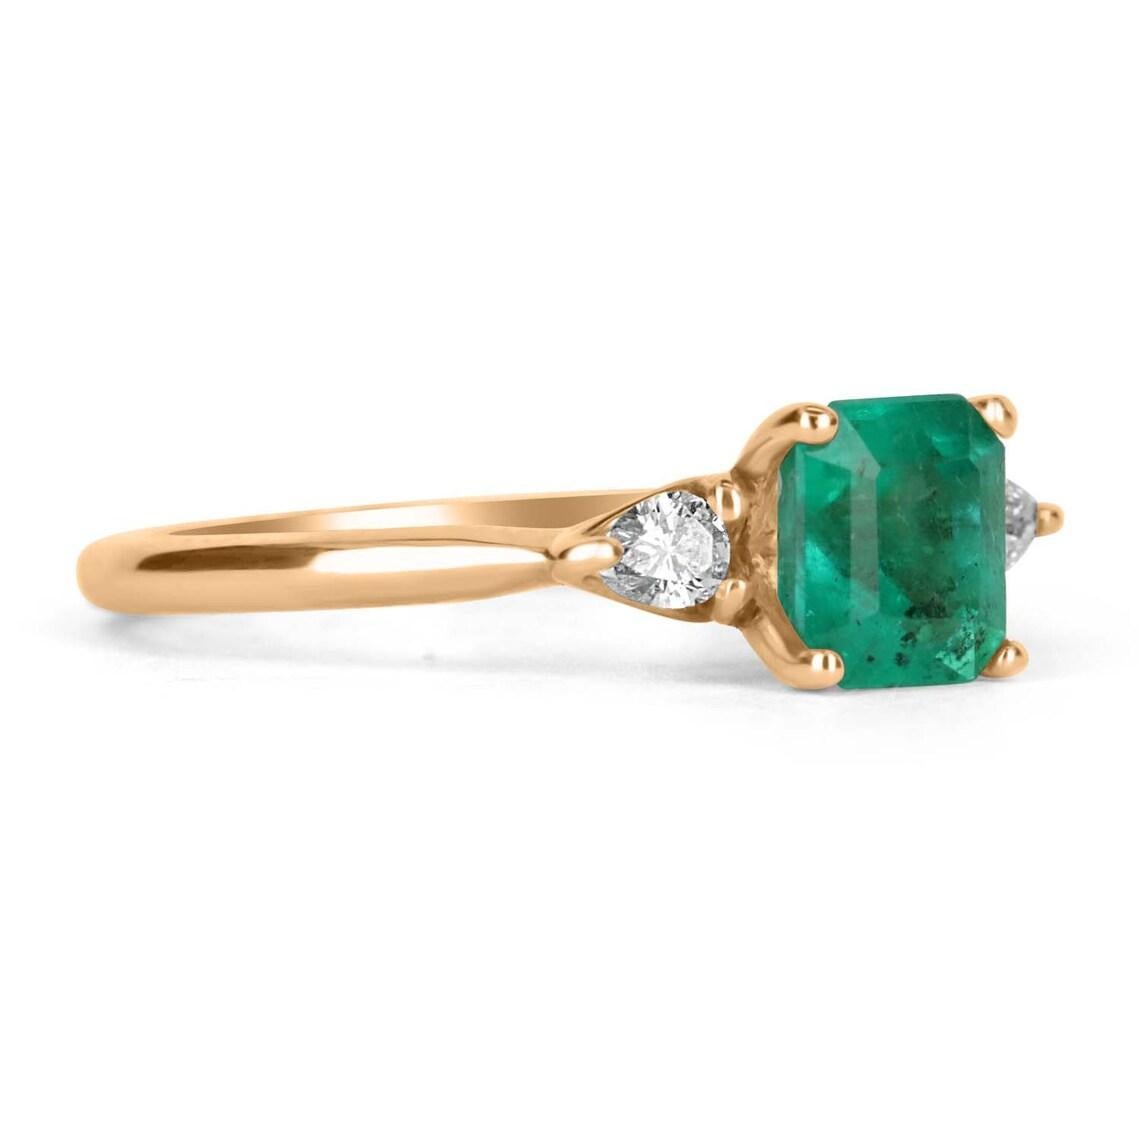 A classic Colombian emerald and diamond three-stone engagement, statement, or right-hand ring. Dexterously crafted in gleaming 14K yellow gold this ring features a 1.18-carat natural Colombian emerald-emerald cut from the famous Chivor mines. Set in